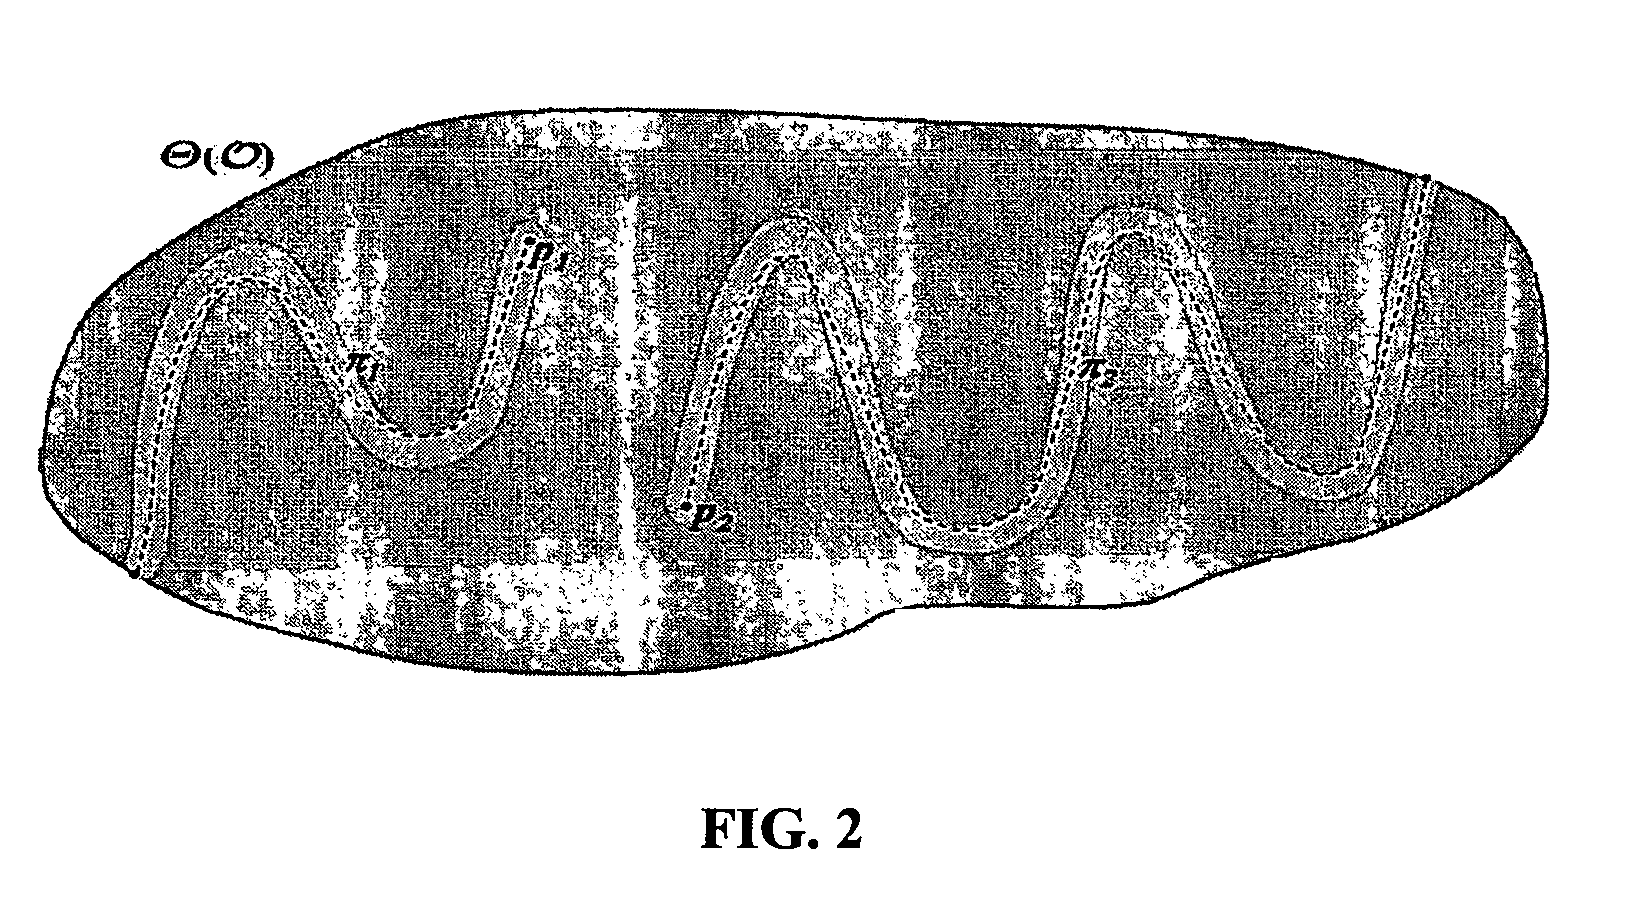 Method for measuring structural thickness from low-resolution digital images